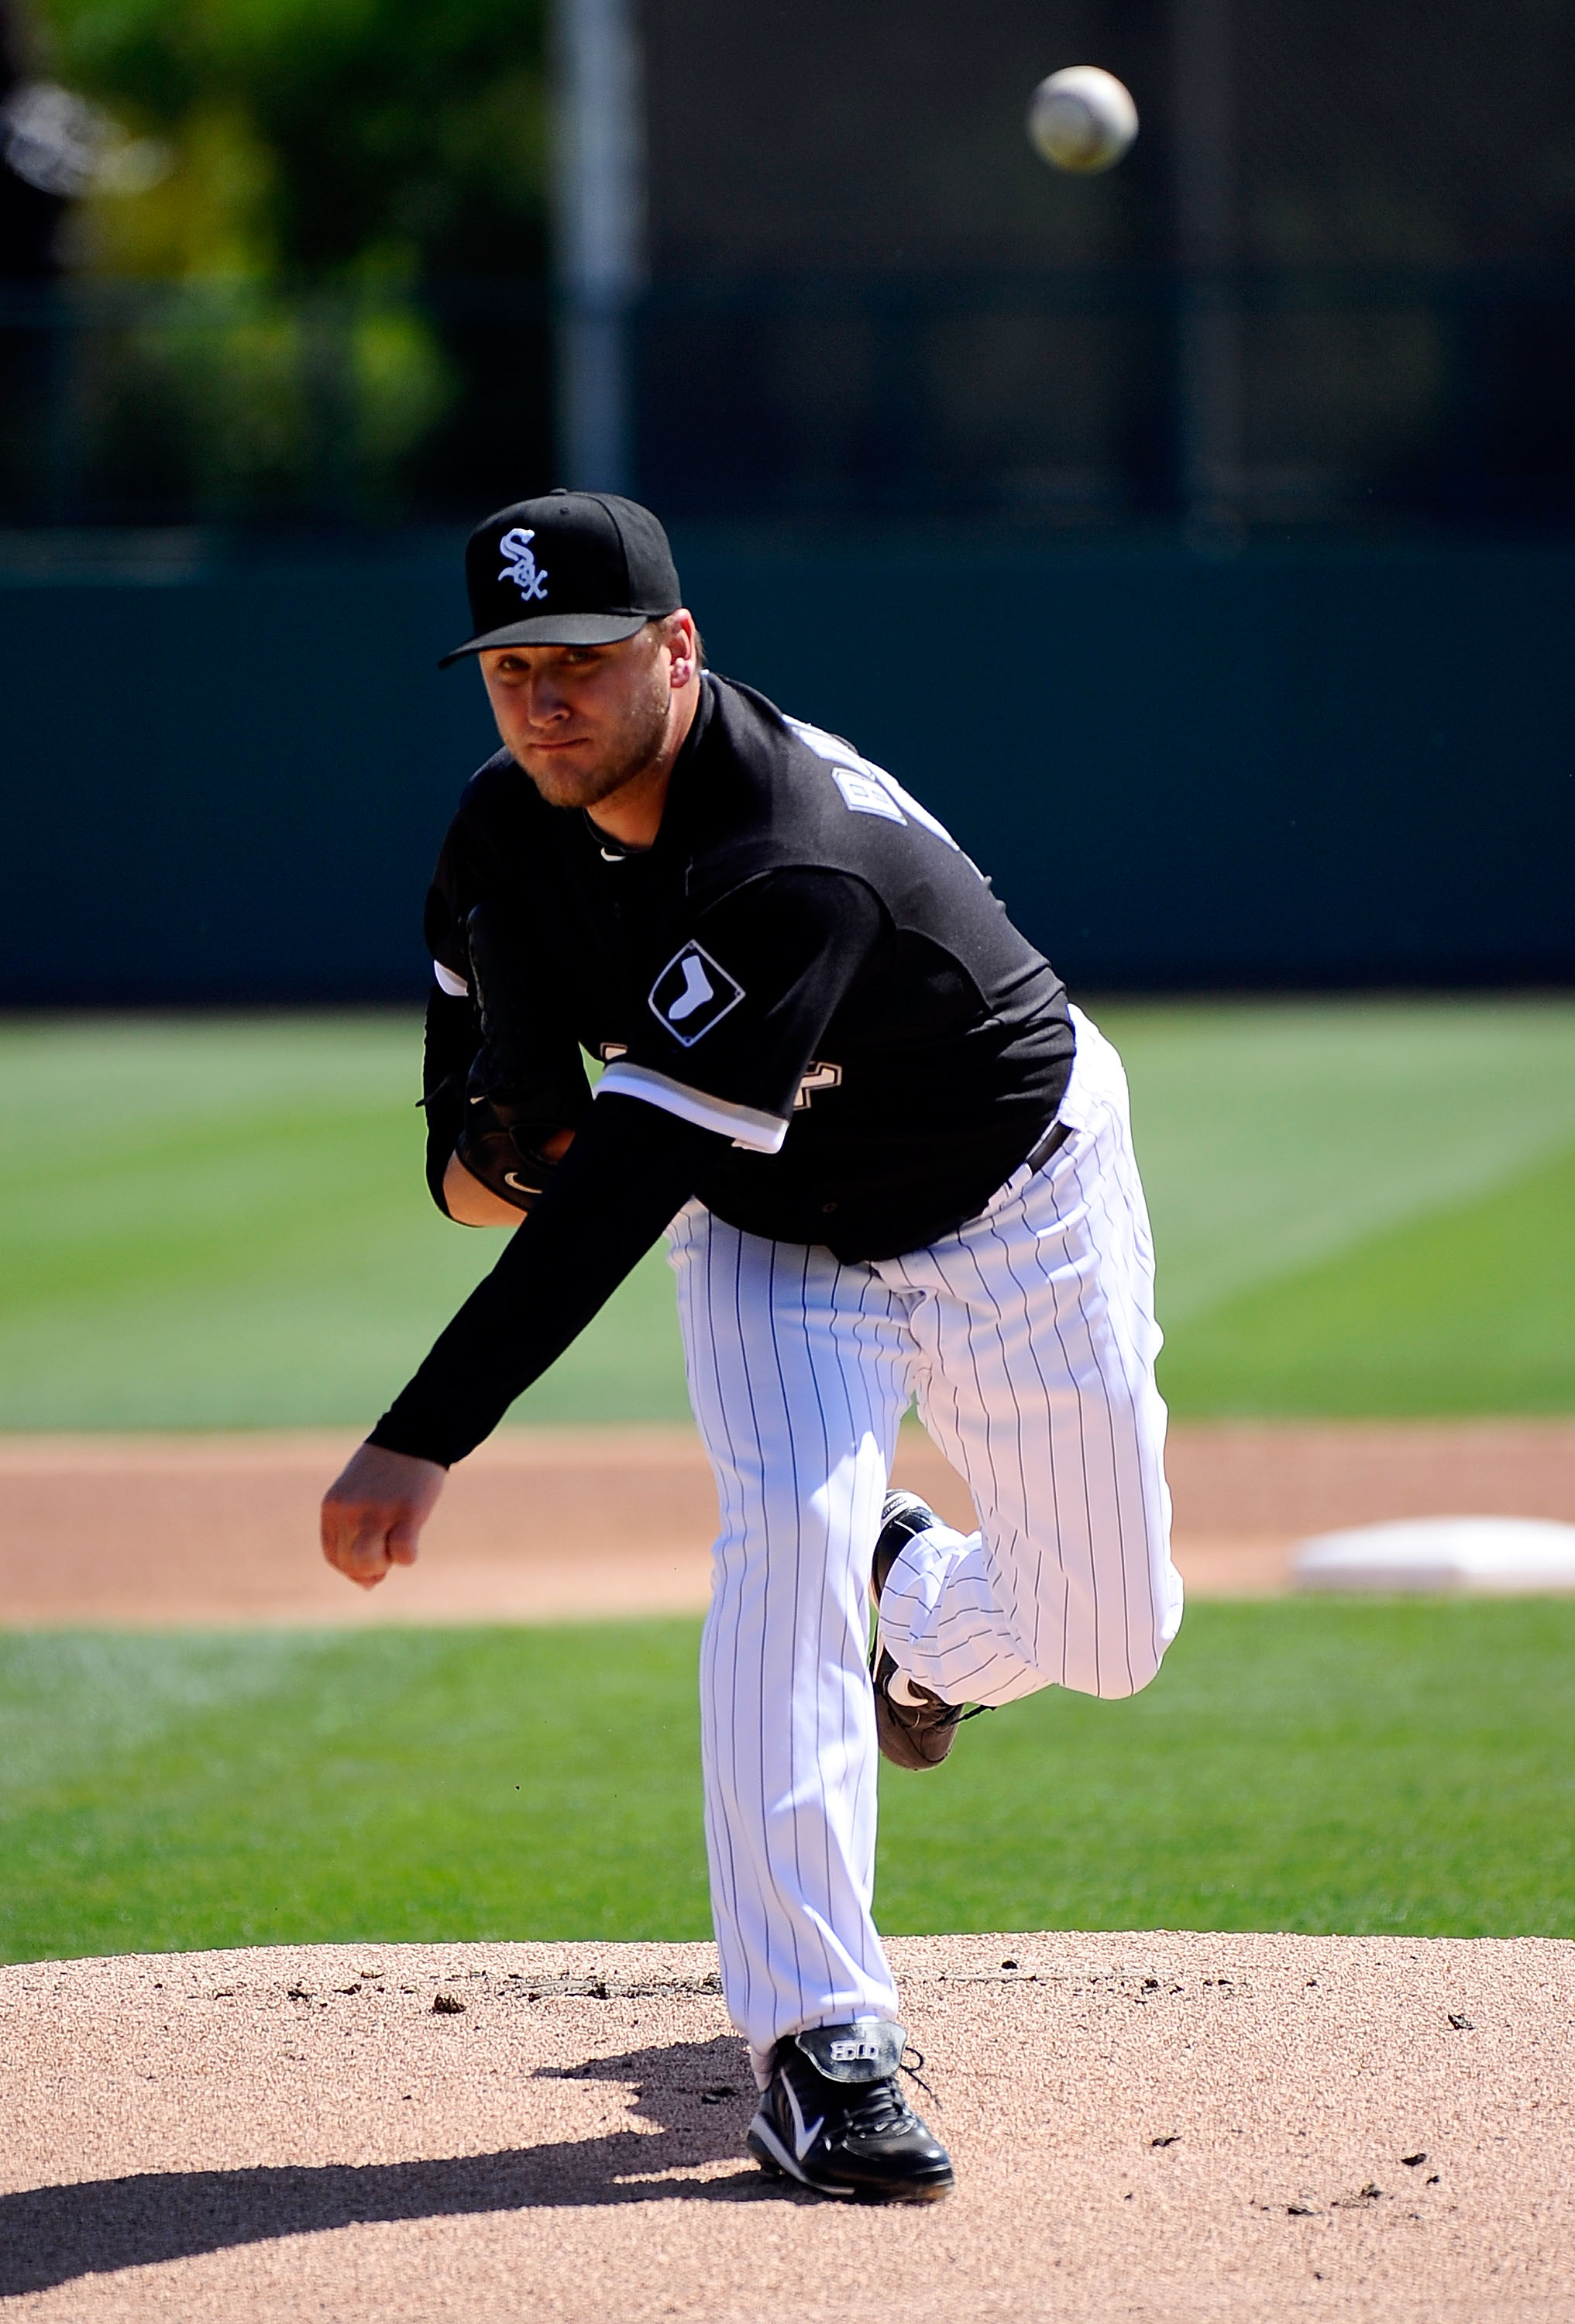 White Sox announce details for Mark Buehrle's day at Guaranteed Rate Field